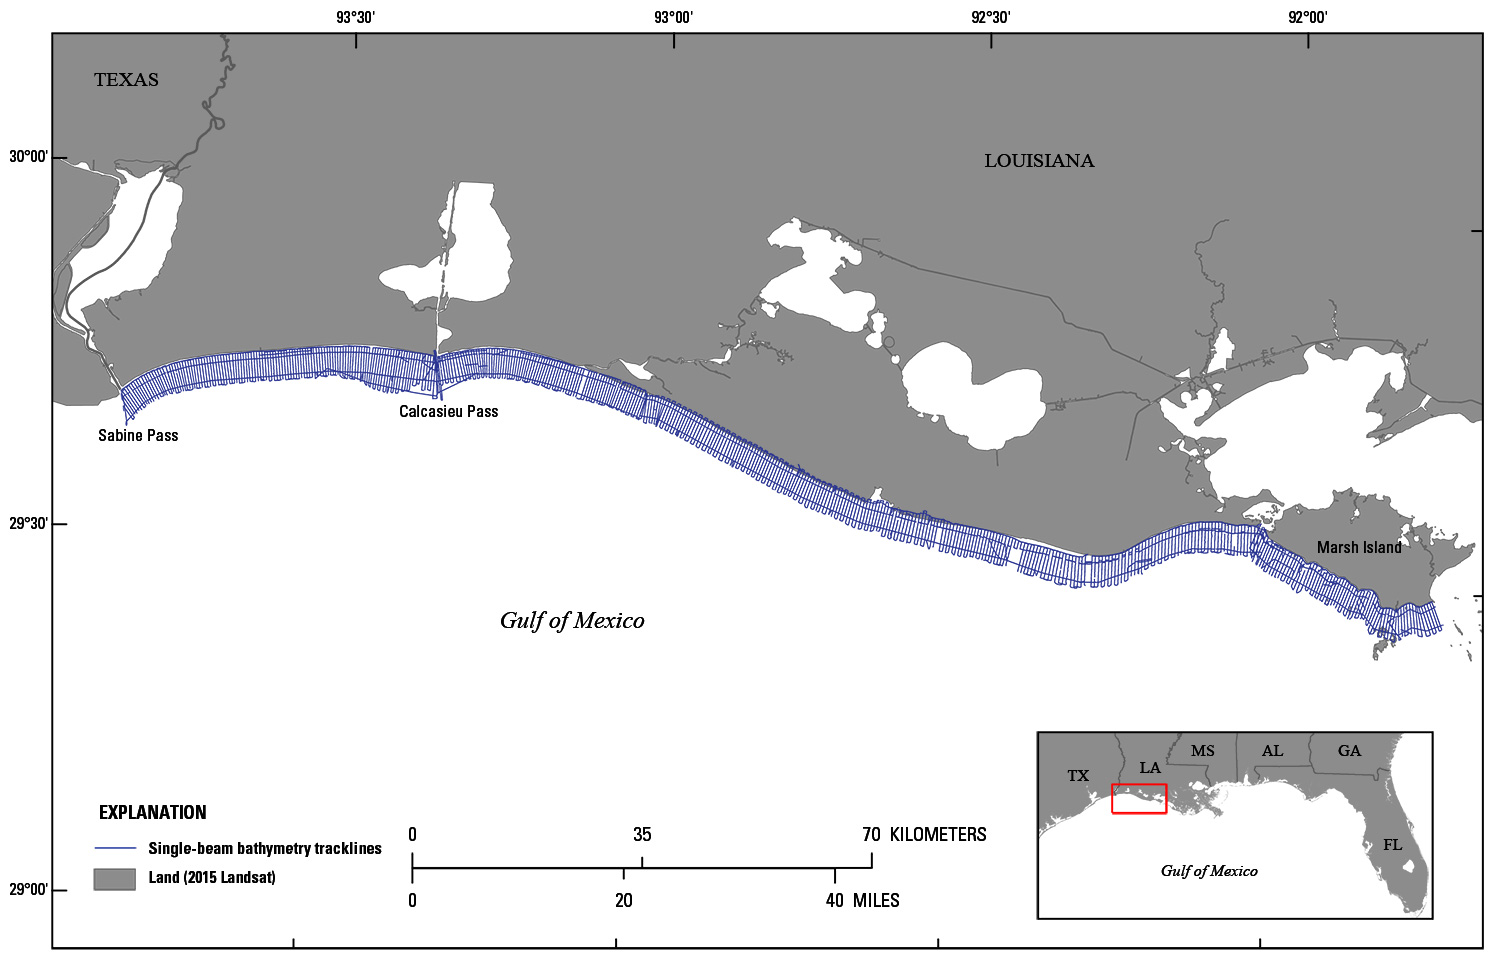 Labeled graphic map showing track lines from survey along the coast, with inset map. 
